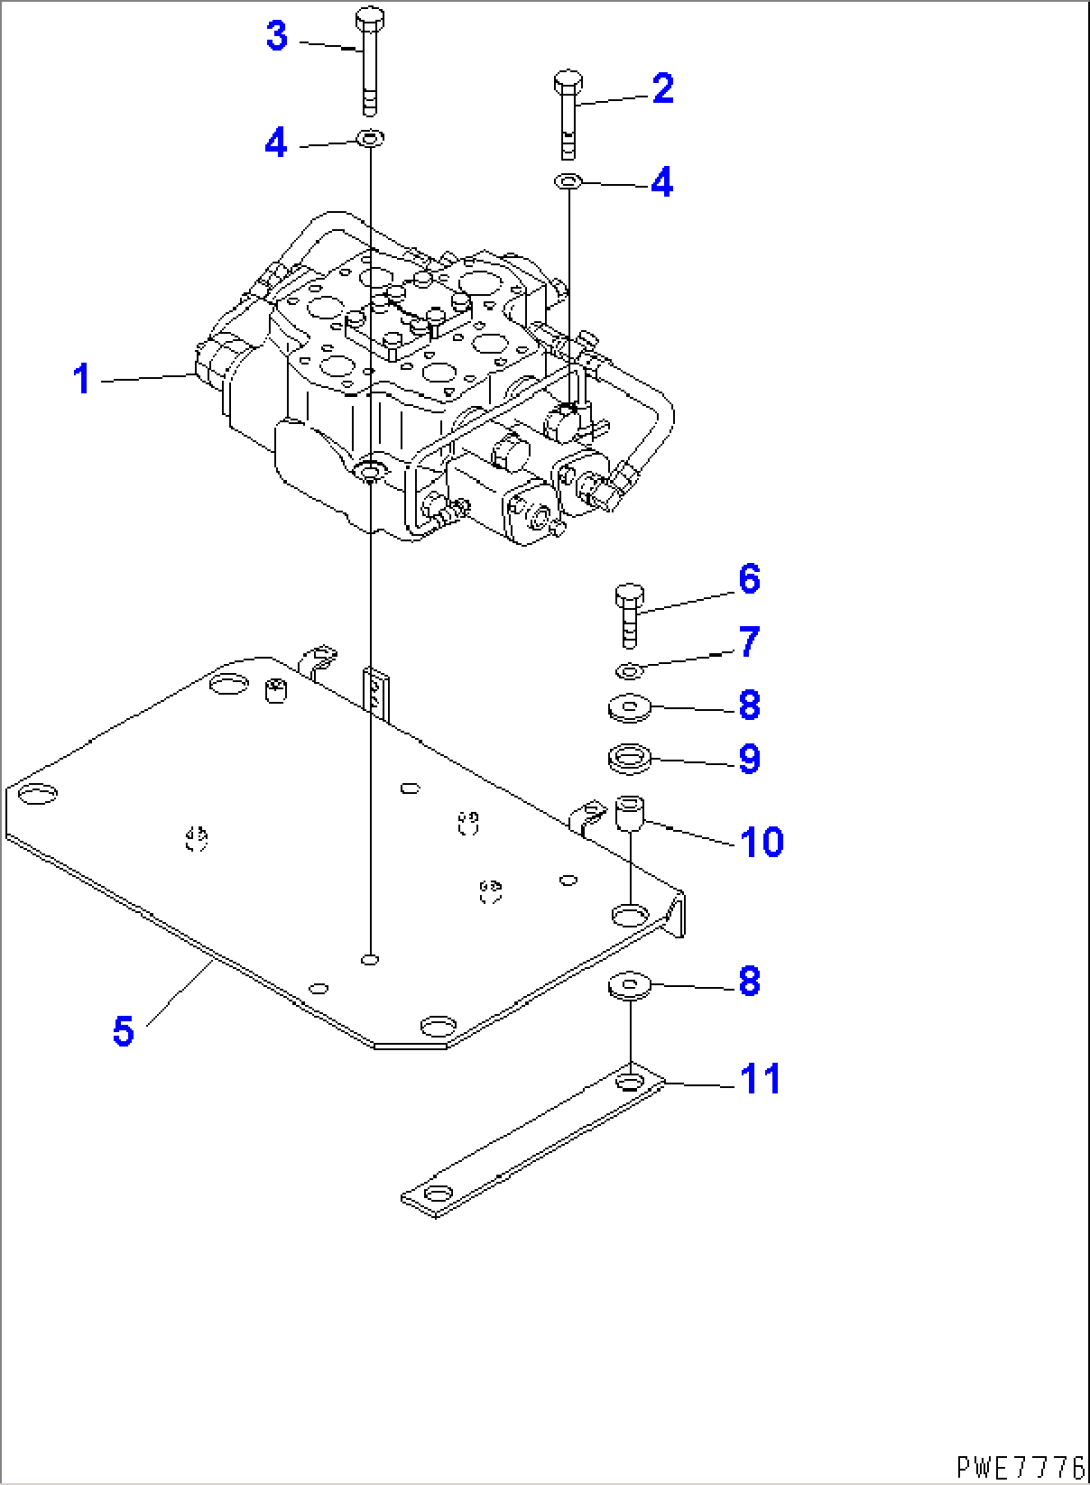 HYDRAULIC MAIN VALVE (VALVE AND MOUNTING PARTS) (WITH E.C.S.S.)(#50001-50256)